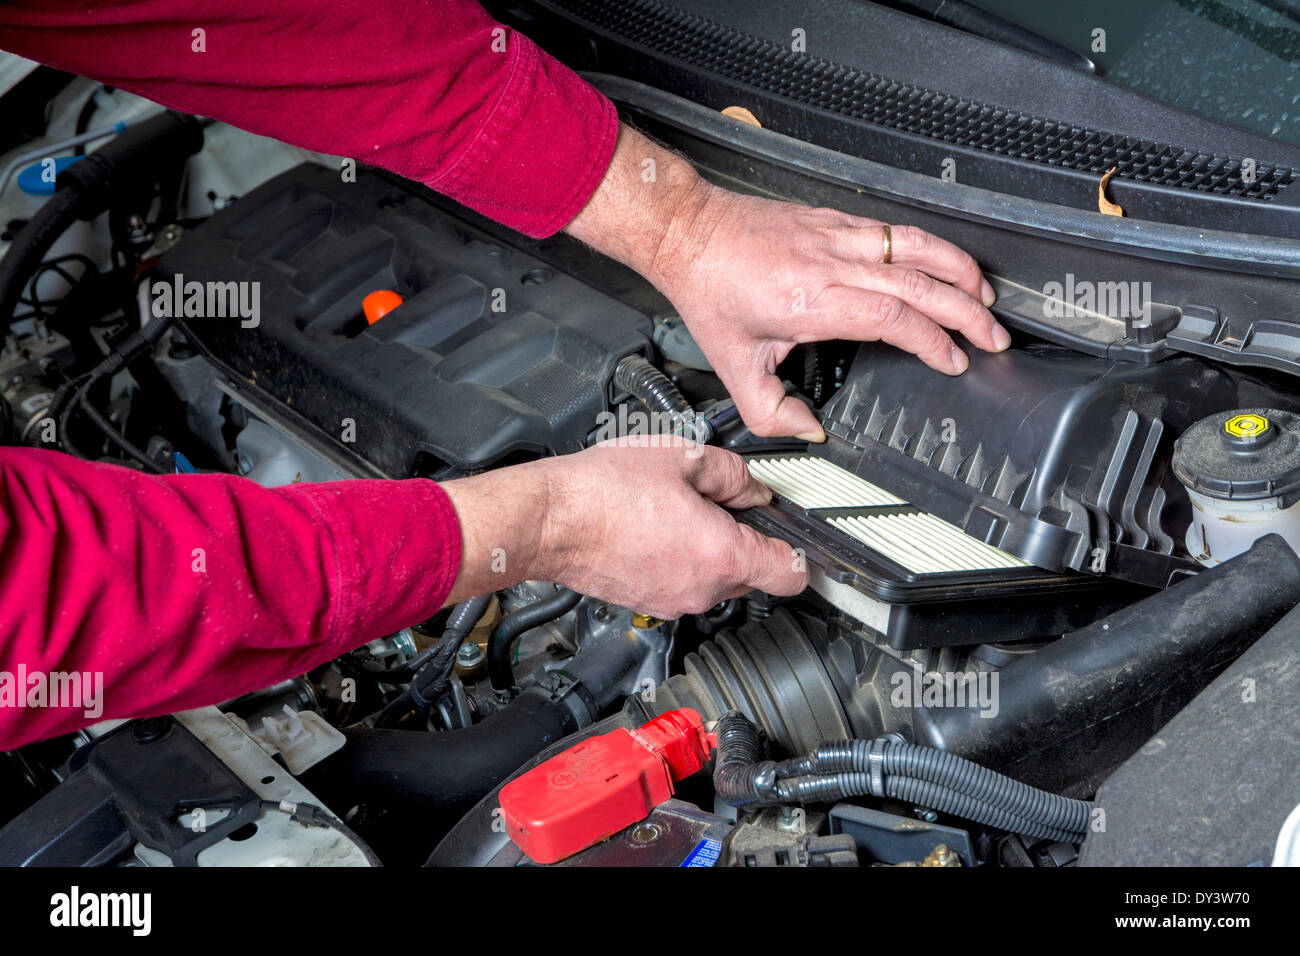 Replacing an Ari Cleaner in a car Stock Photo